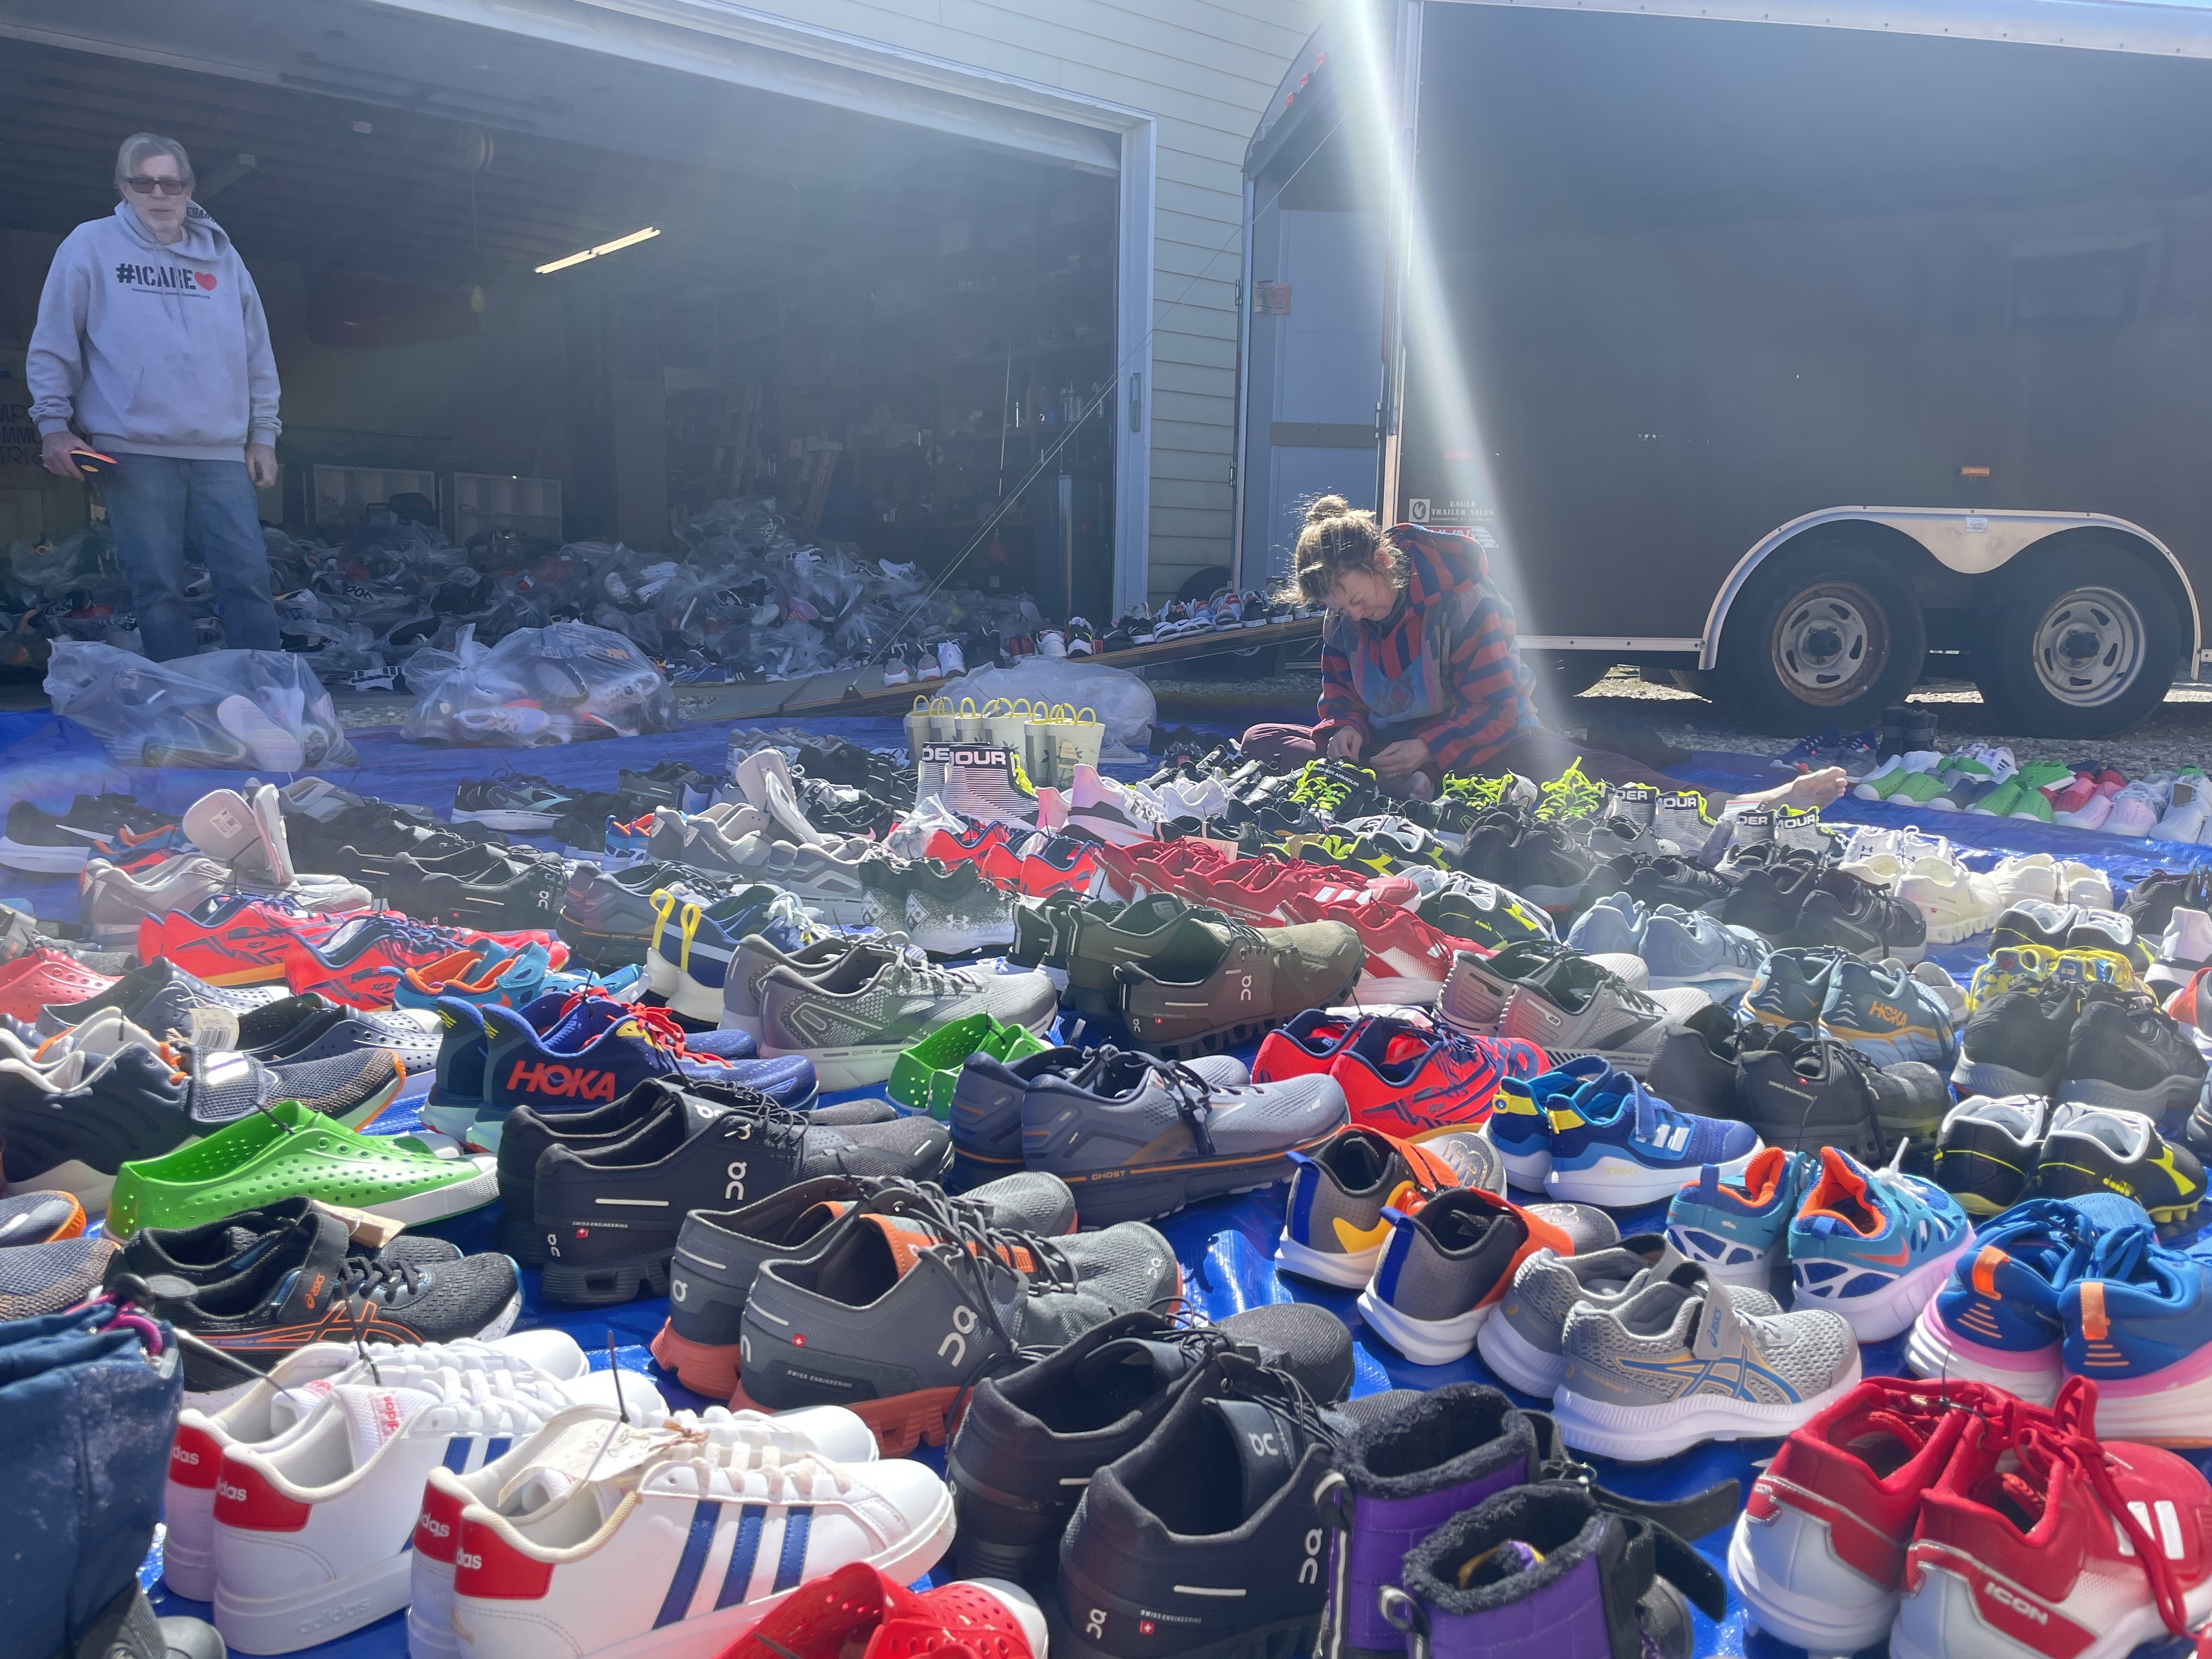 Frances Jones was among the first to help sort through the mountains of shoes to find matched pairs.
Michael Wright